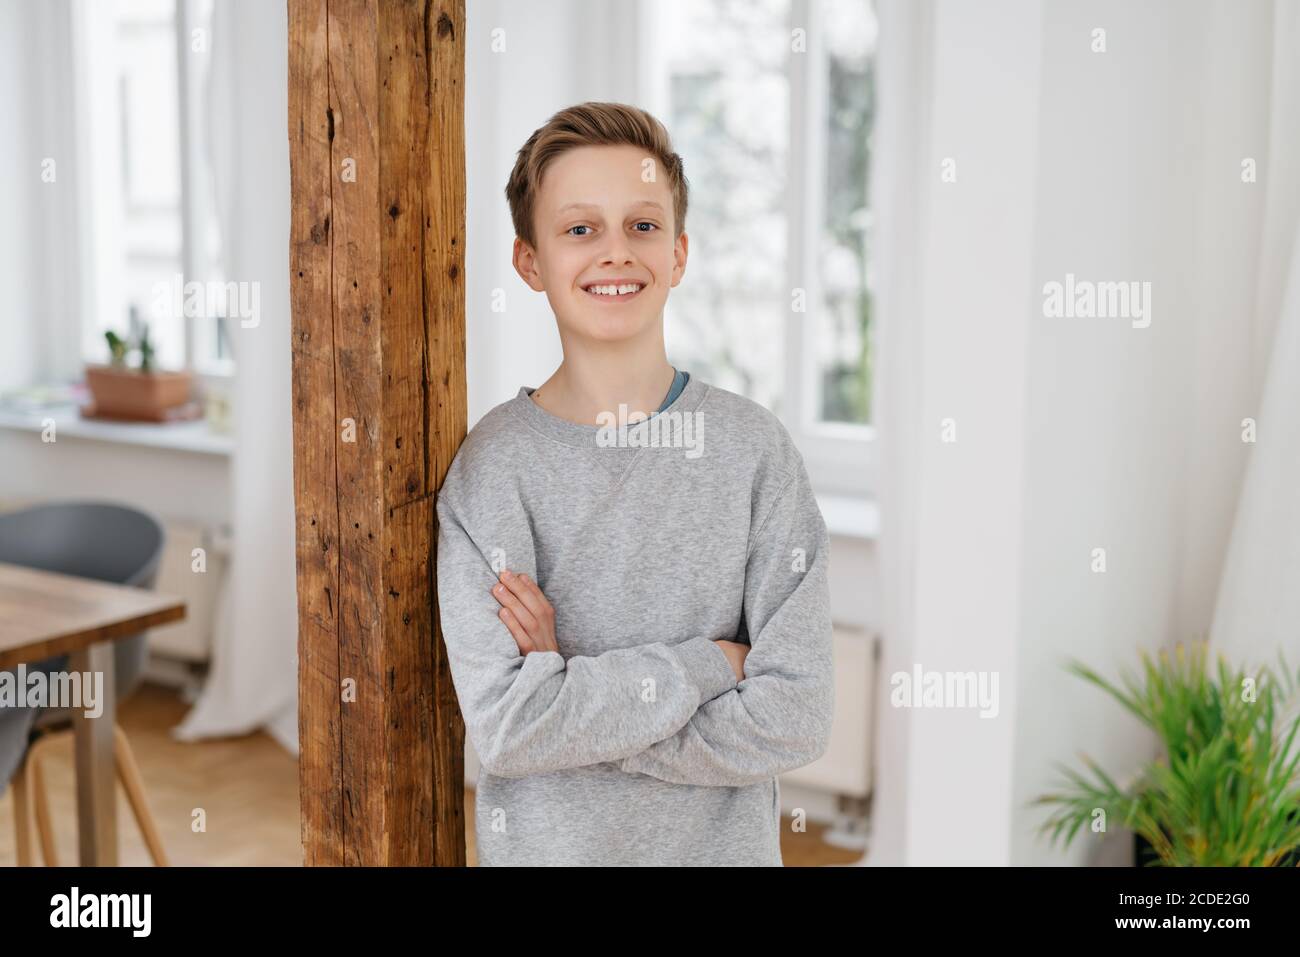 Self-assured young boy with a happy friendly smile standing leaning against a wooden interior pillar with folded arms in an apartment Stock Photo